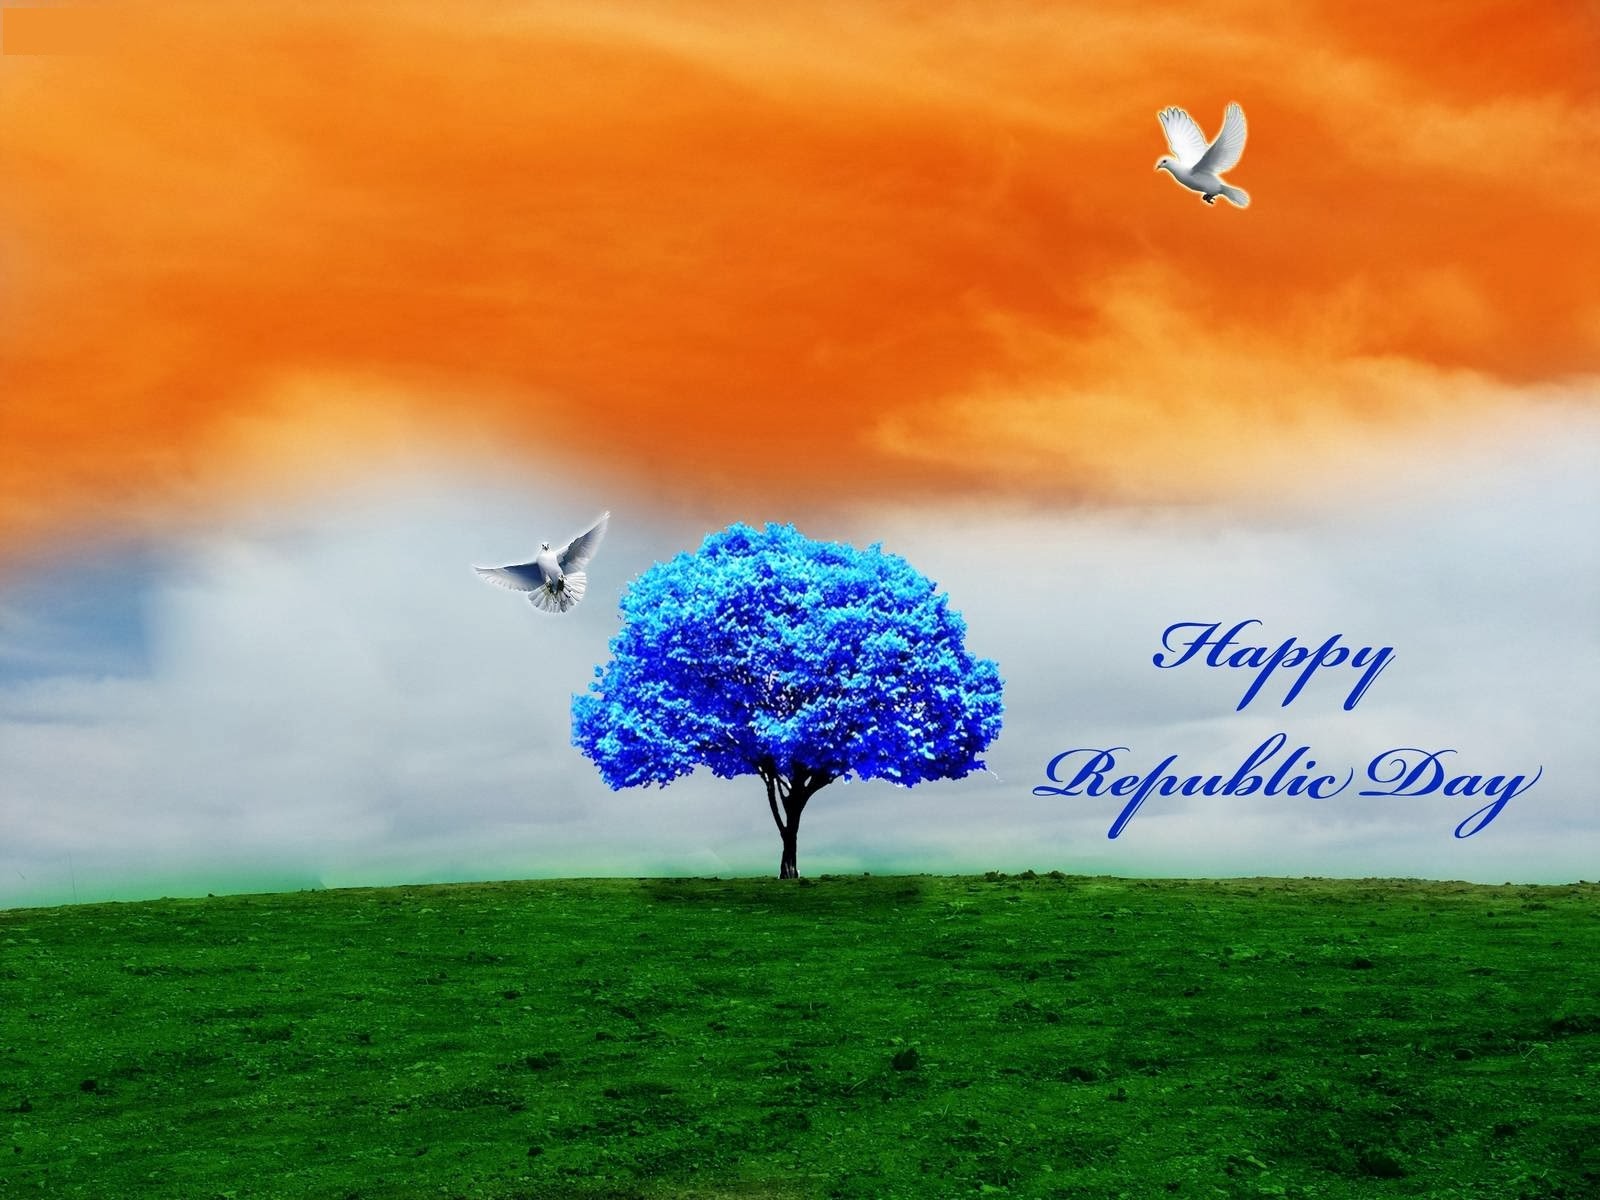 republic day wallpapers free download 